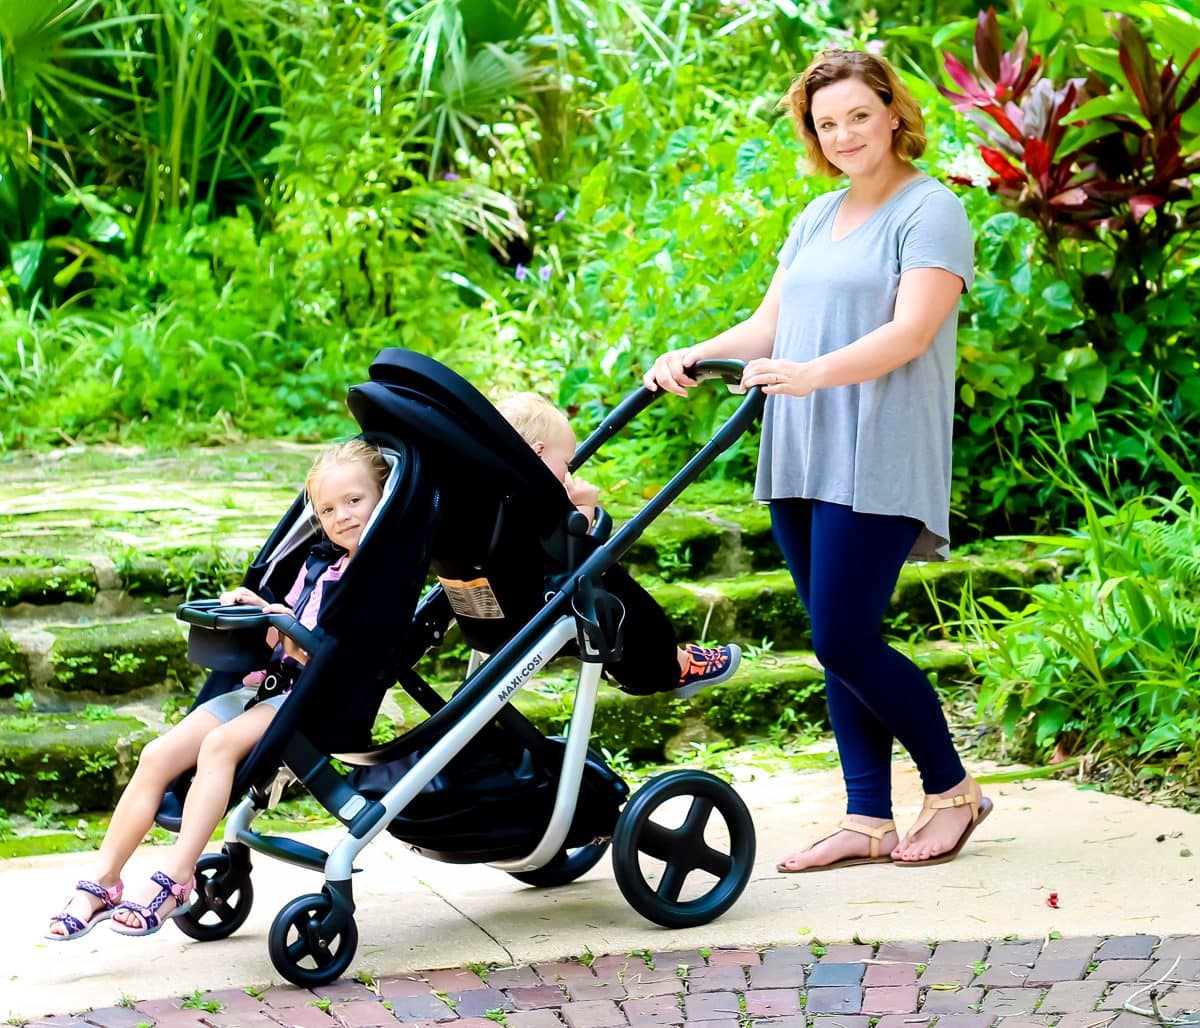 Daily Mom Parent Portal Double Stroller For Infant And Toddler Use